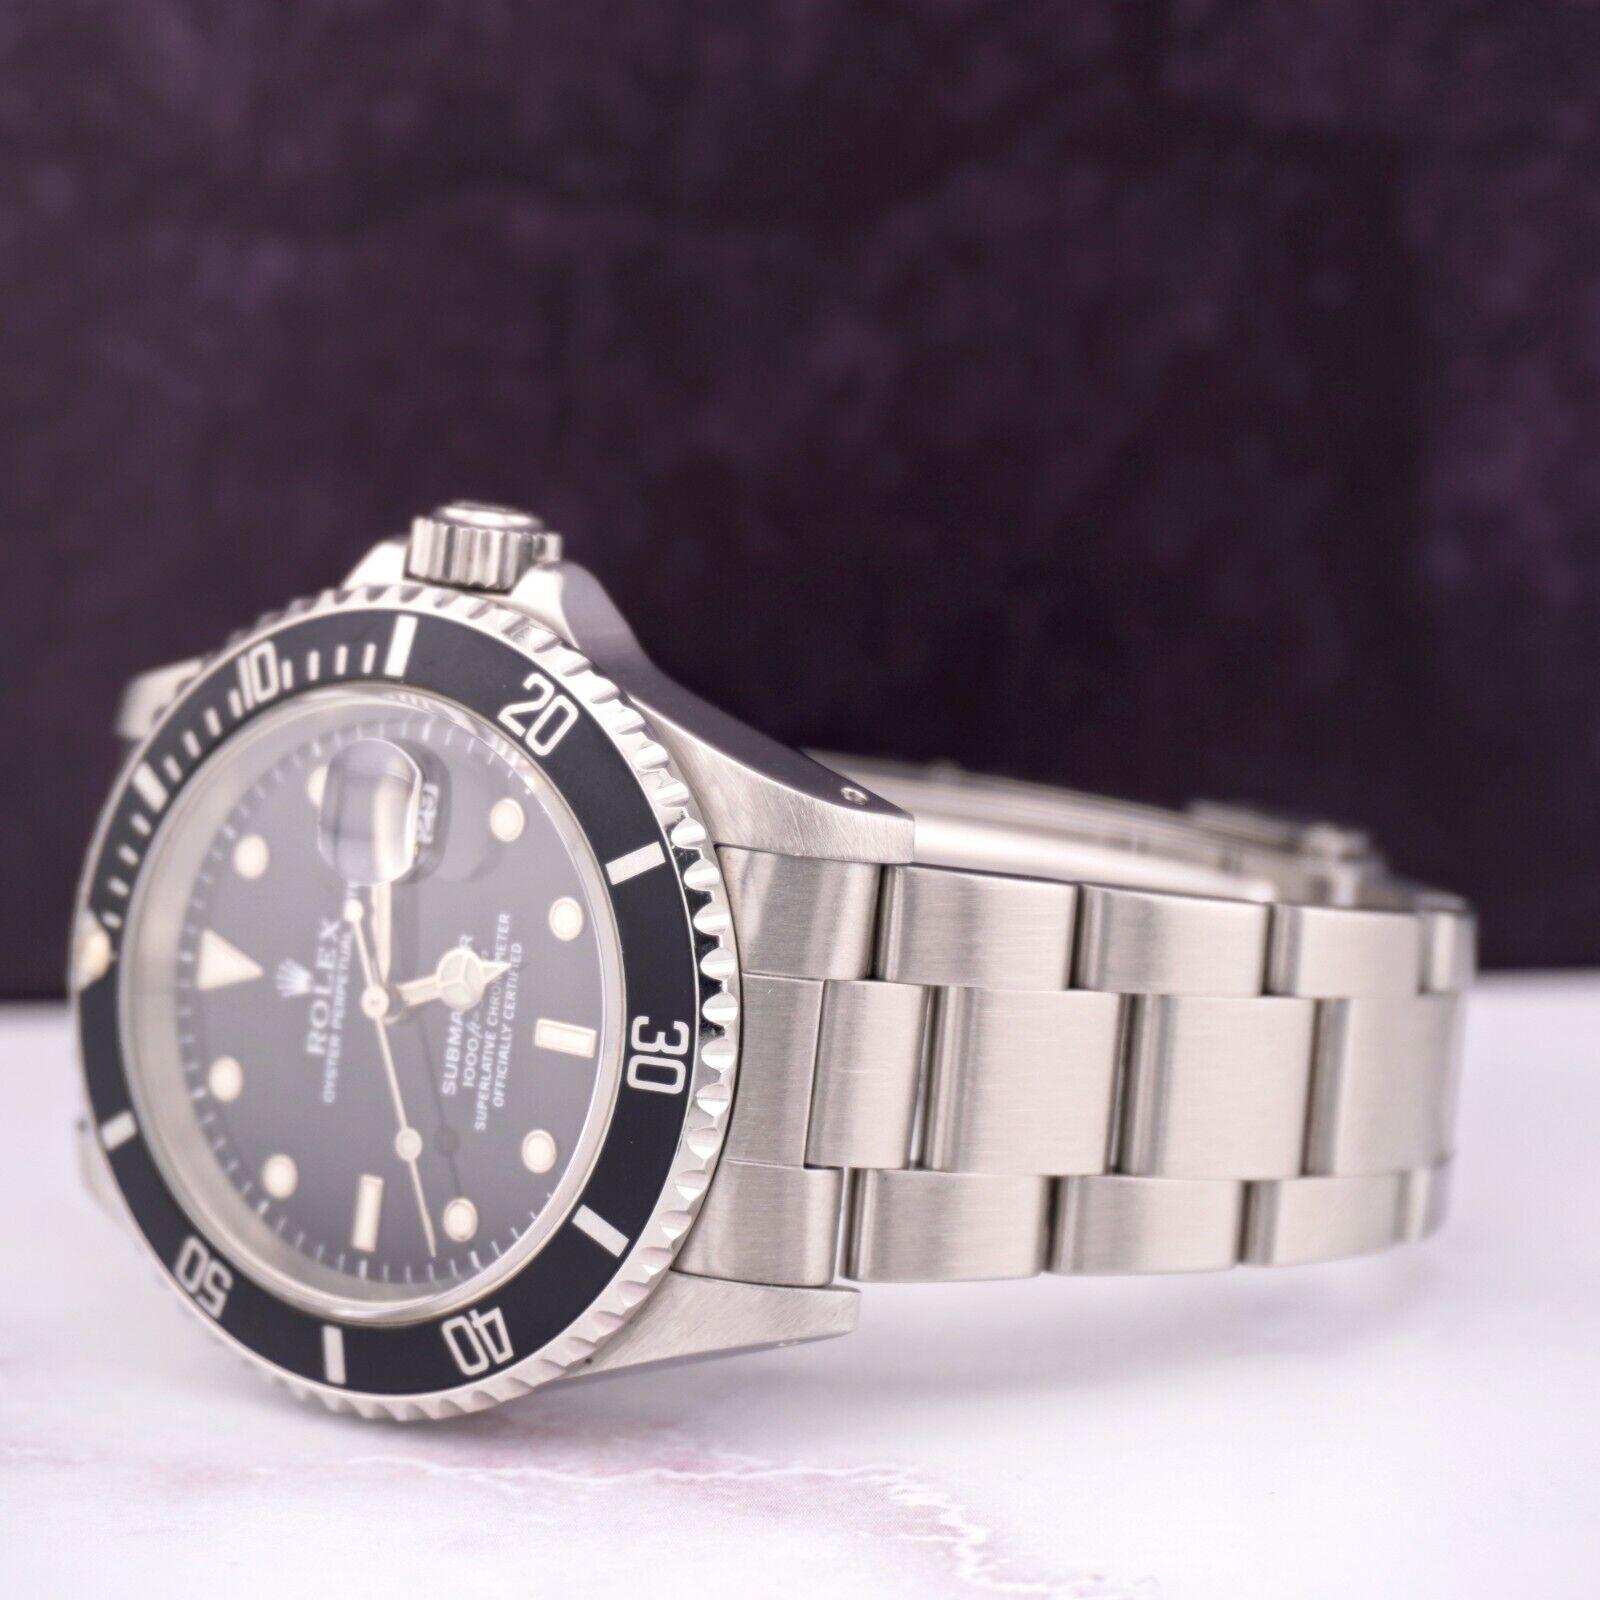 Rolex Submariner Date 40mm Steel Black Dial Mens Watch Oyster 16610 In Good Condition For Sale In Pleasanton, CA